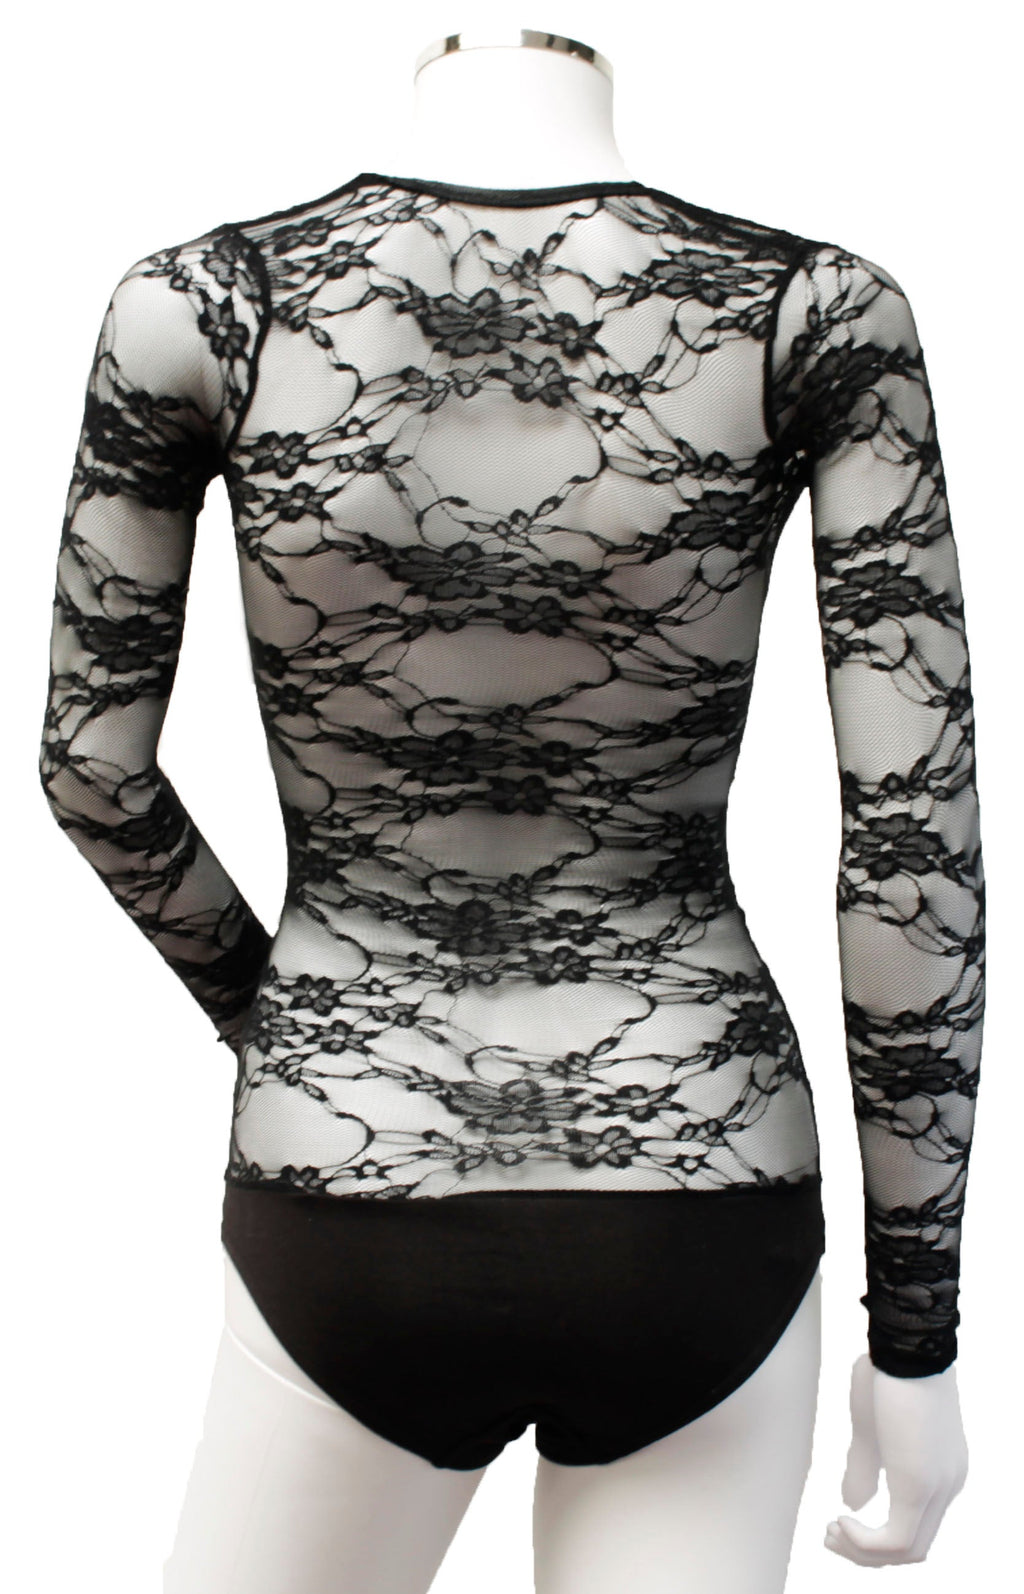 Black Lace - Underbust with Sleeves - US Stock